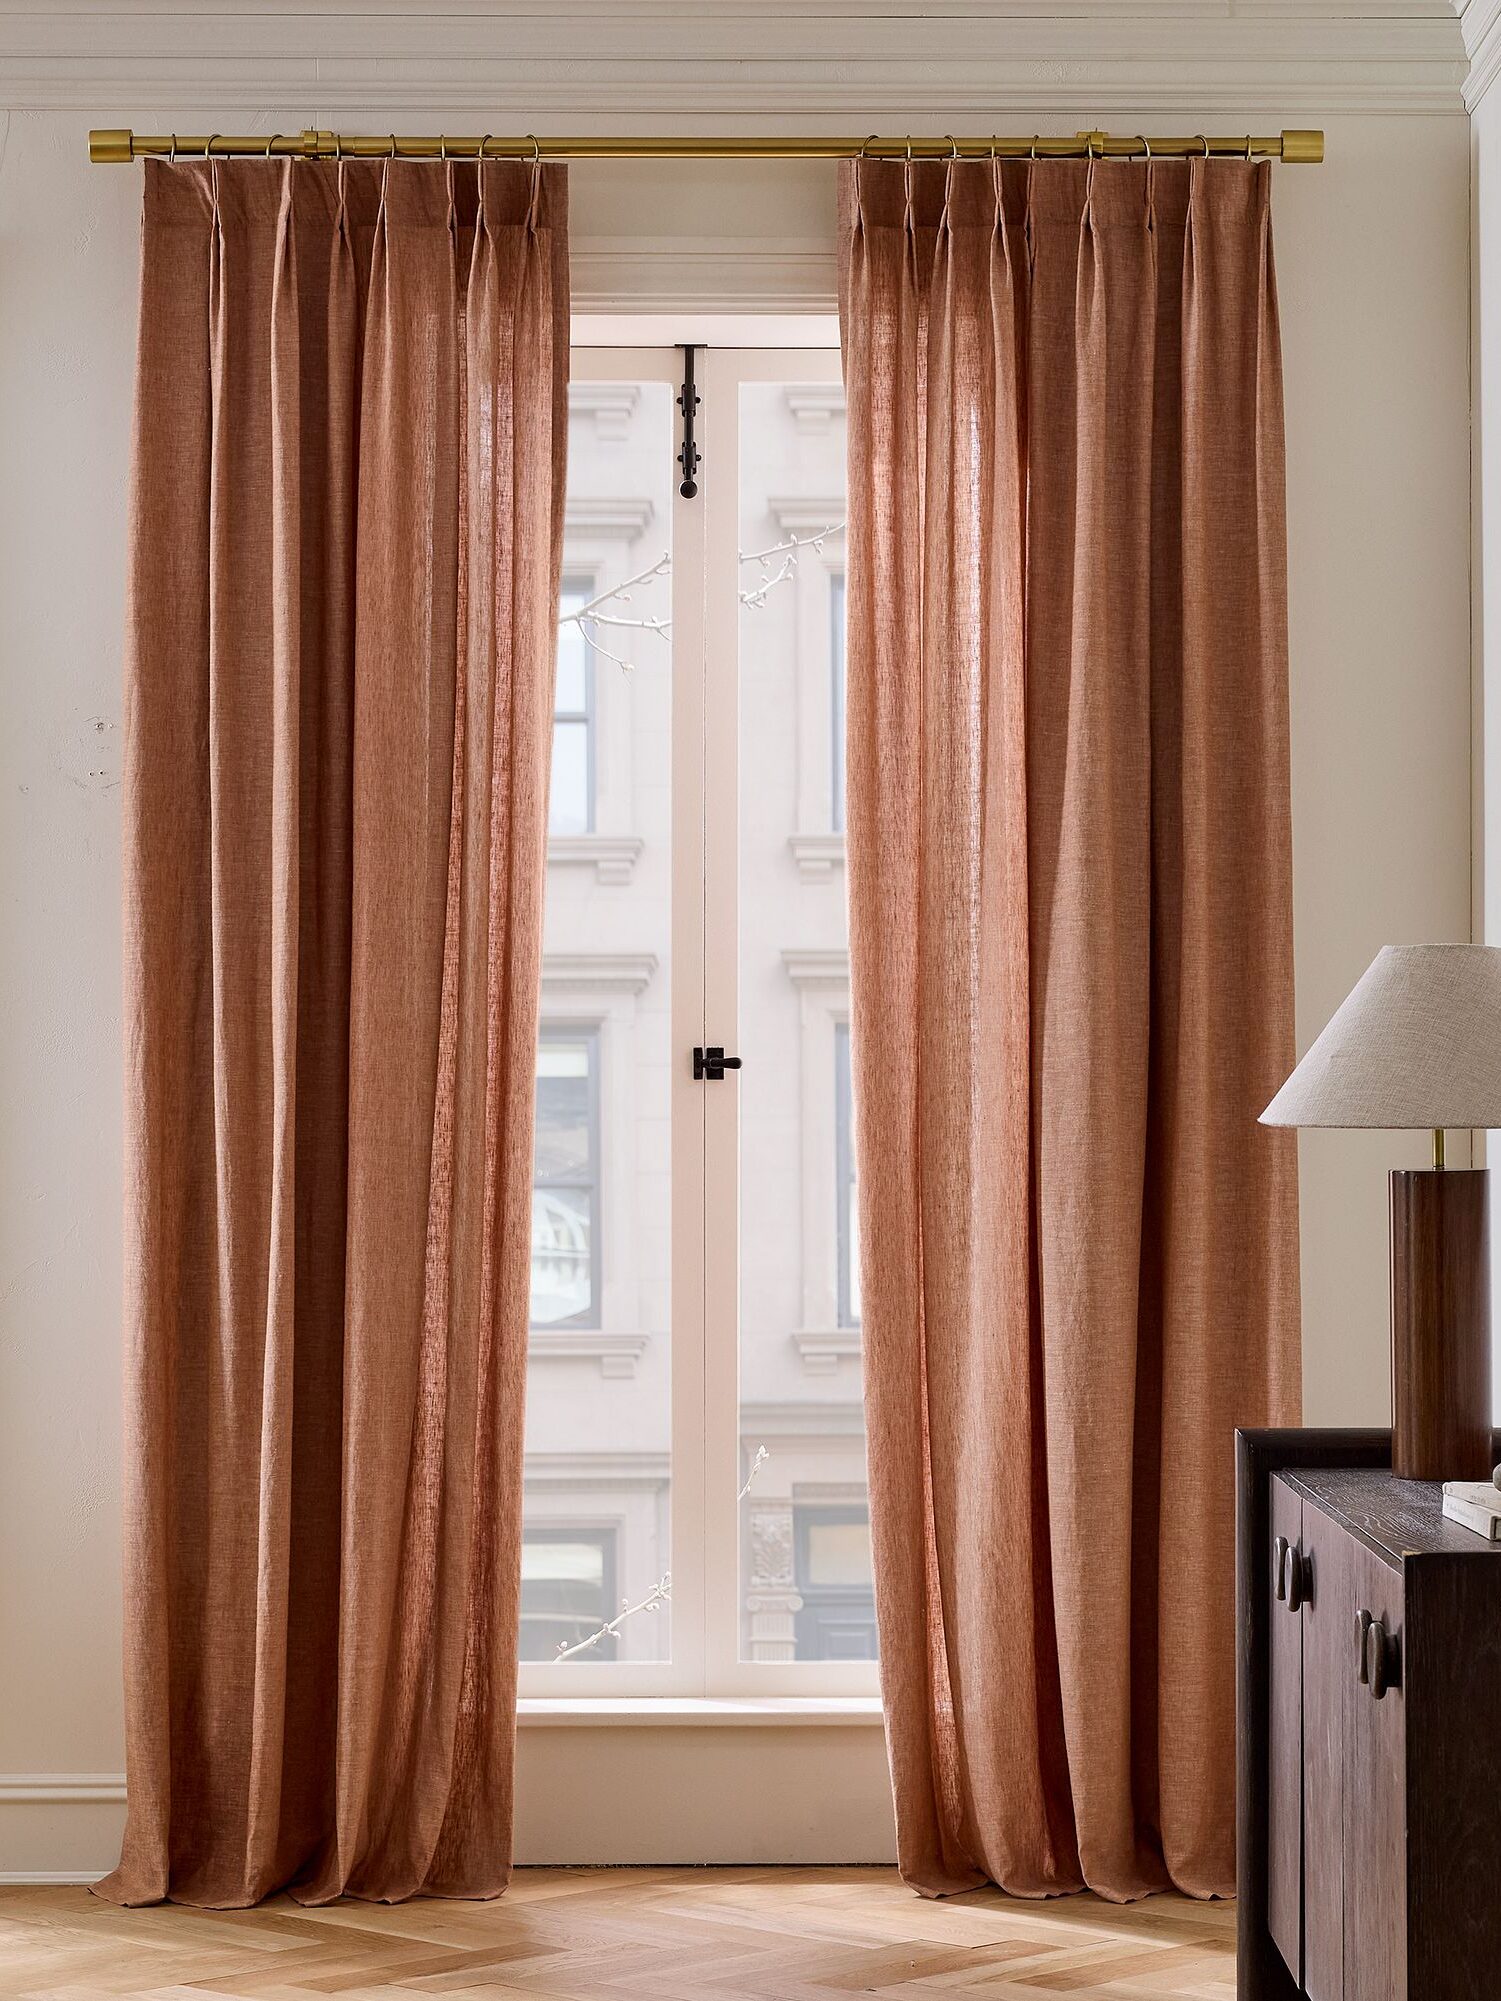 Floor-length terracotta curtains on a gold rod, framing a sunlit window, with a wooden cabinet and lamp on the right.